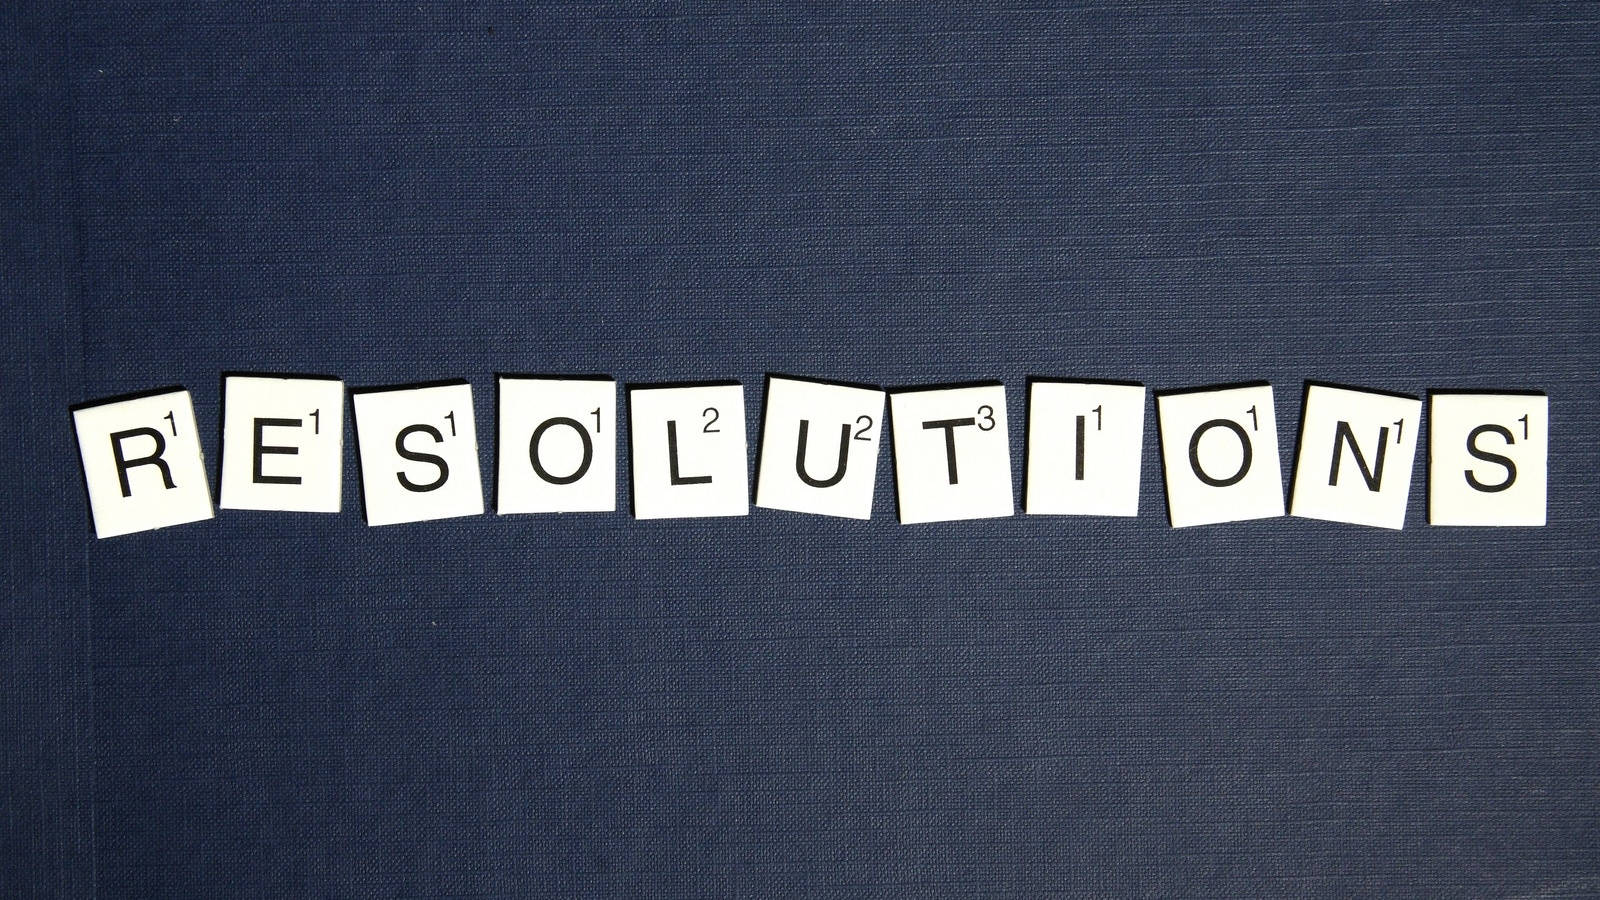 Scrabble tile pieces spelling "resolutions" set atop a blue fabric background.